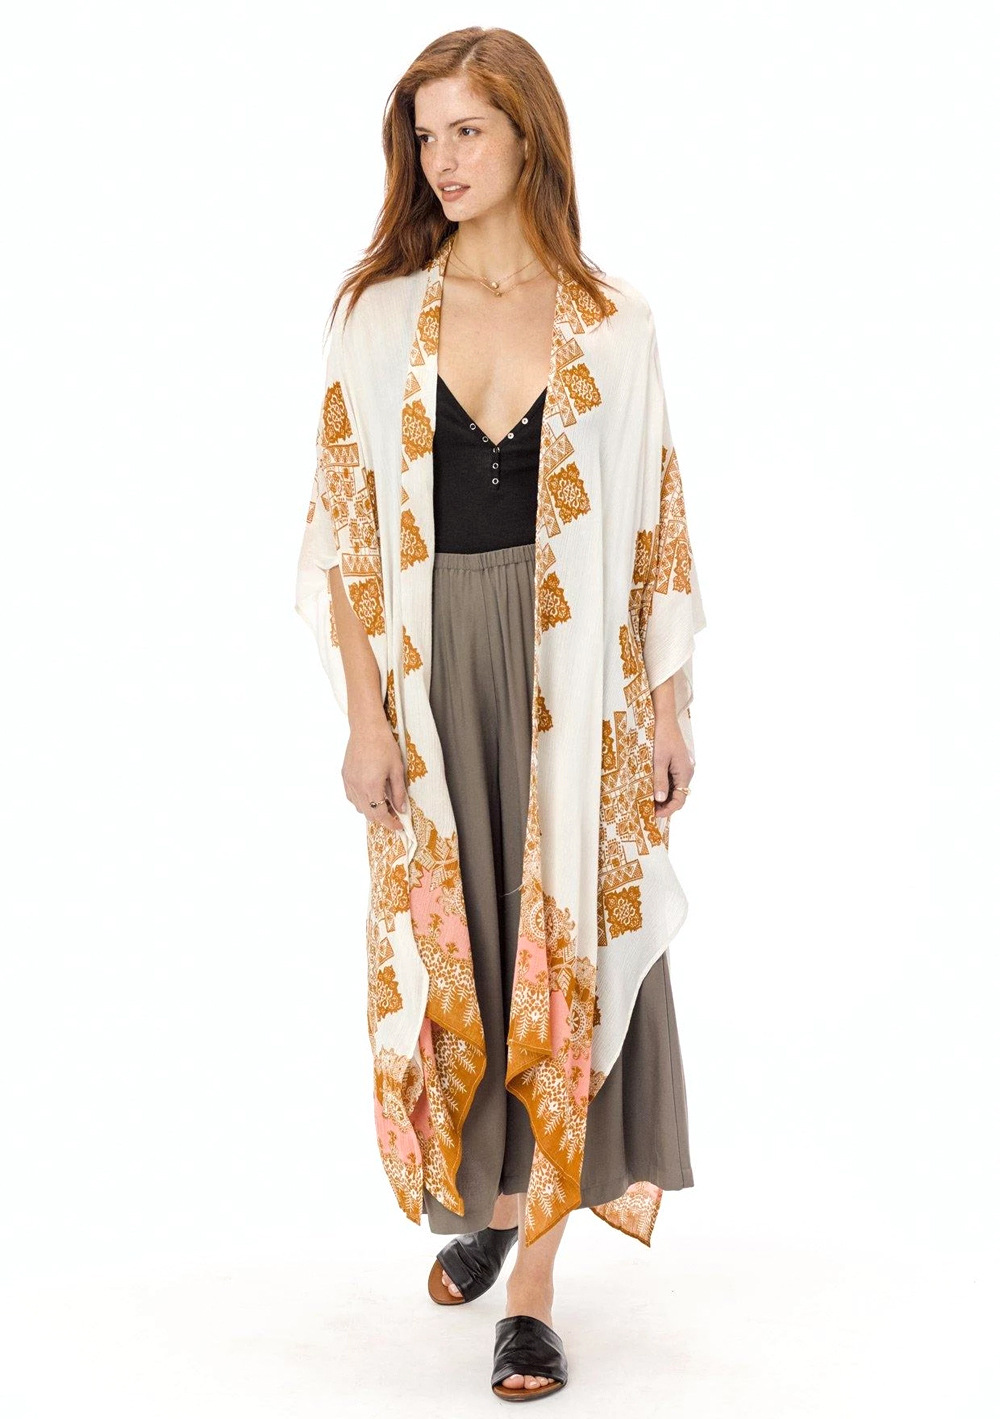 summer women s fashion printed cardigan loose casual beach vacation cover gown NSDF1483